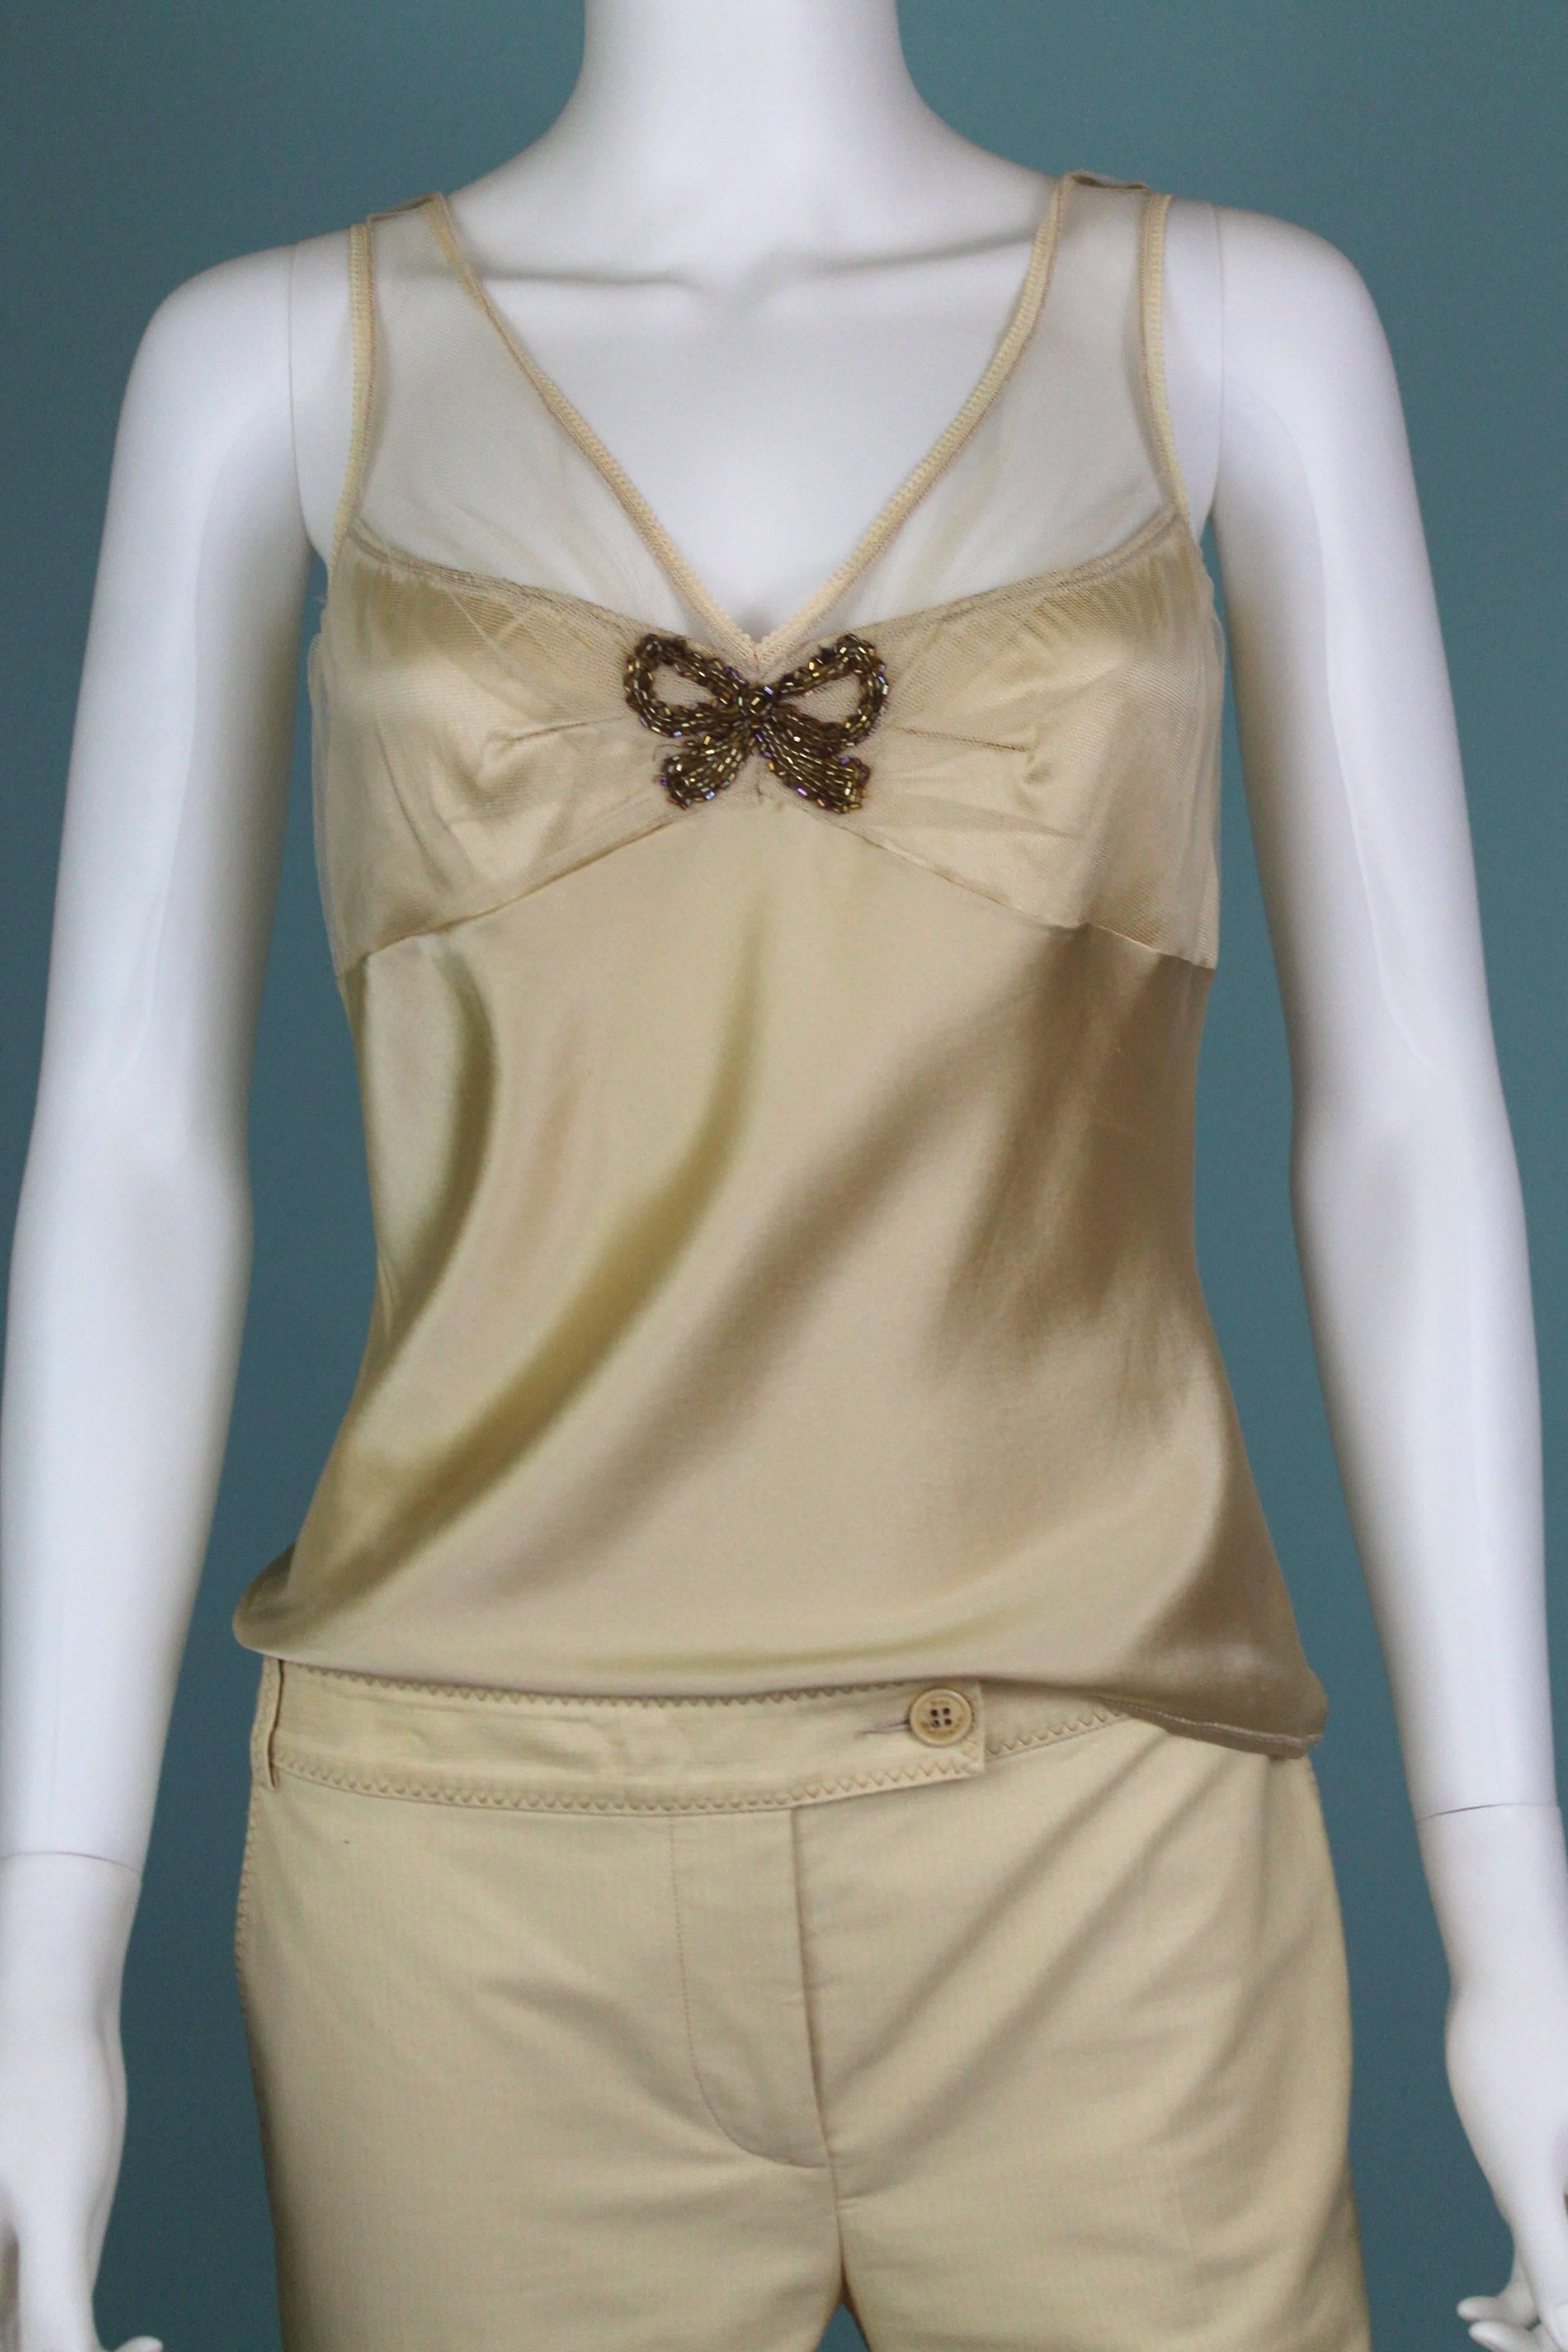 -Beautiful set from John Galliano
-Camisole  tank top is made from silk with lycra so there is a bit of stretch. The bow embellishment on the bust is made out of glass beads. 
-Camisole is sized M. 
-Capri style pants are made from 100% cotton, low